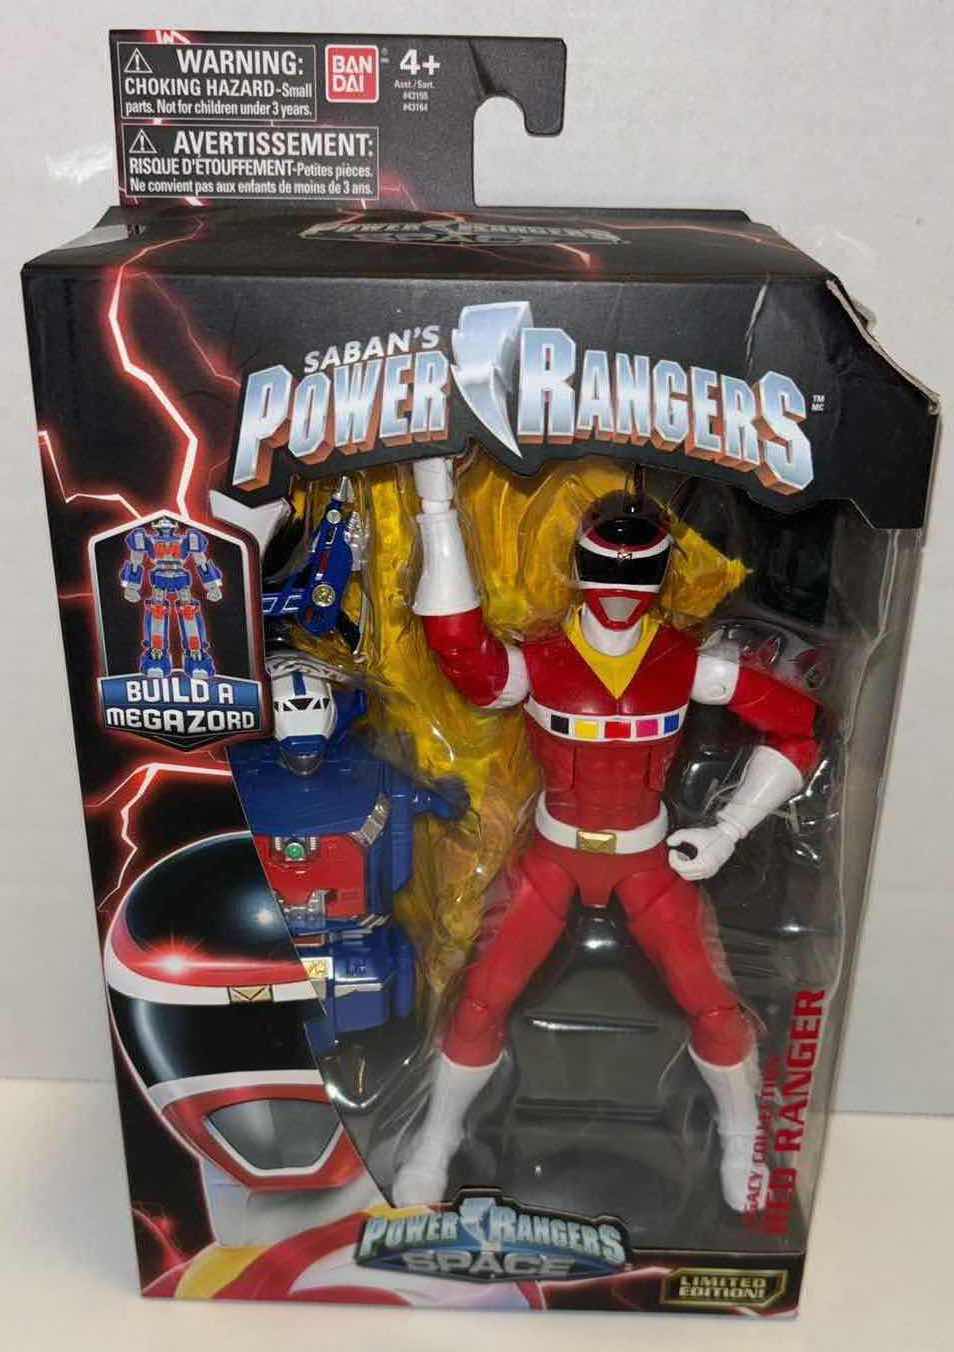 Photo 2 of NEW BANDAI SABAN’S POWER RANGERS ACTION FIGURES & ACCESSORIES 5-PACK, POWER RANGERS IN SPACE LIMITED EDITION LEGACY COLLECTION “RED RANGER, BLACK RANGER, YELLOW RANGER, BLUE RANGER & PINK RANGER”